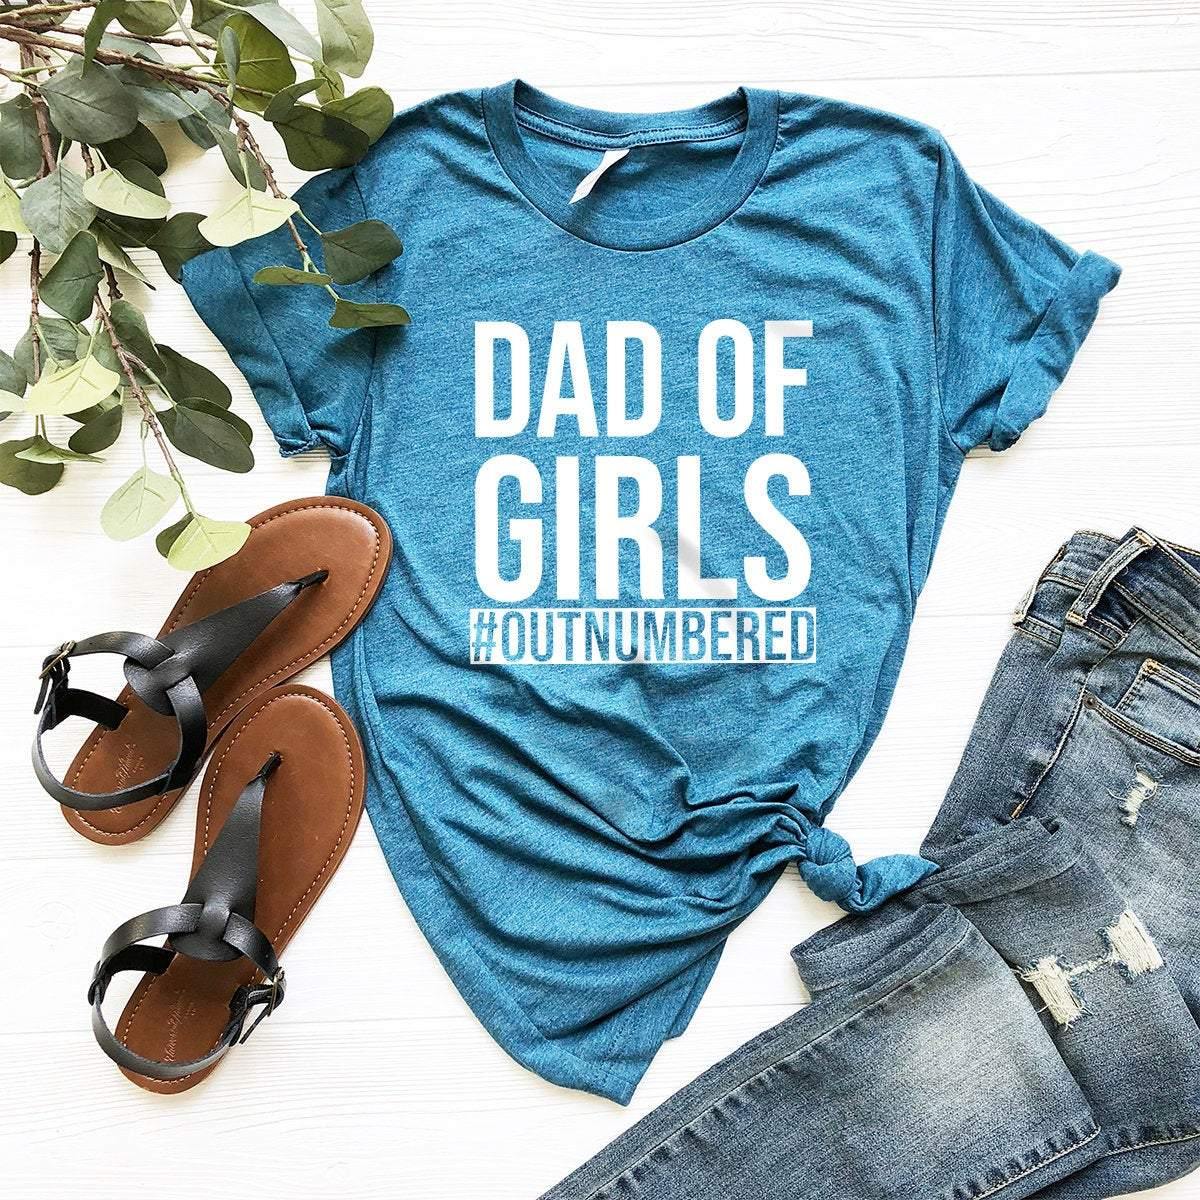 Dad Of Girls Shirt, Girl Dad T-Shirt, Girl Dad Gift, Gift From Daughter, Girl Daddy Shirt, Gift For Dad, Girldad Shirt, Father's Day Shirt - Fastdeliverytees.com